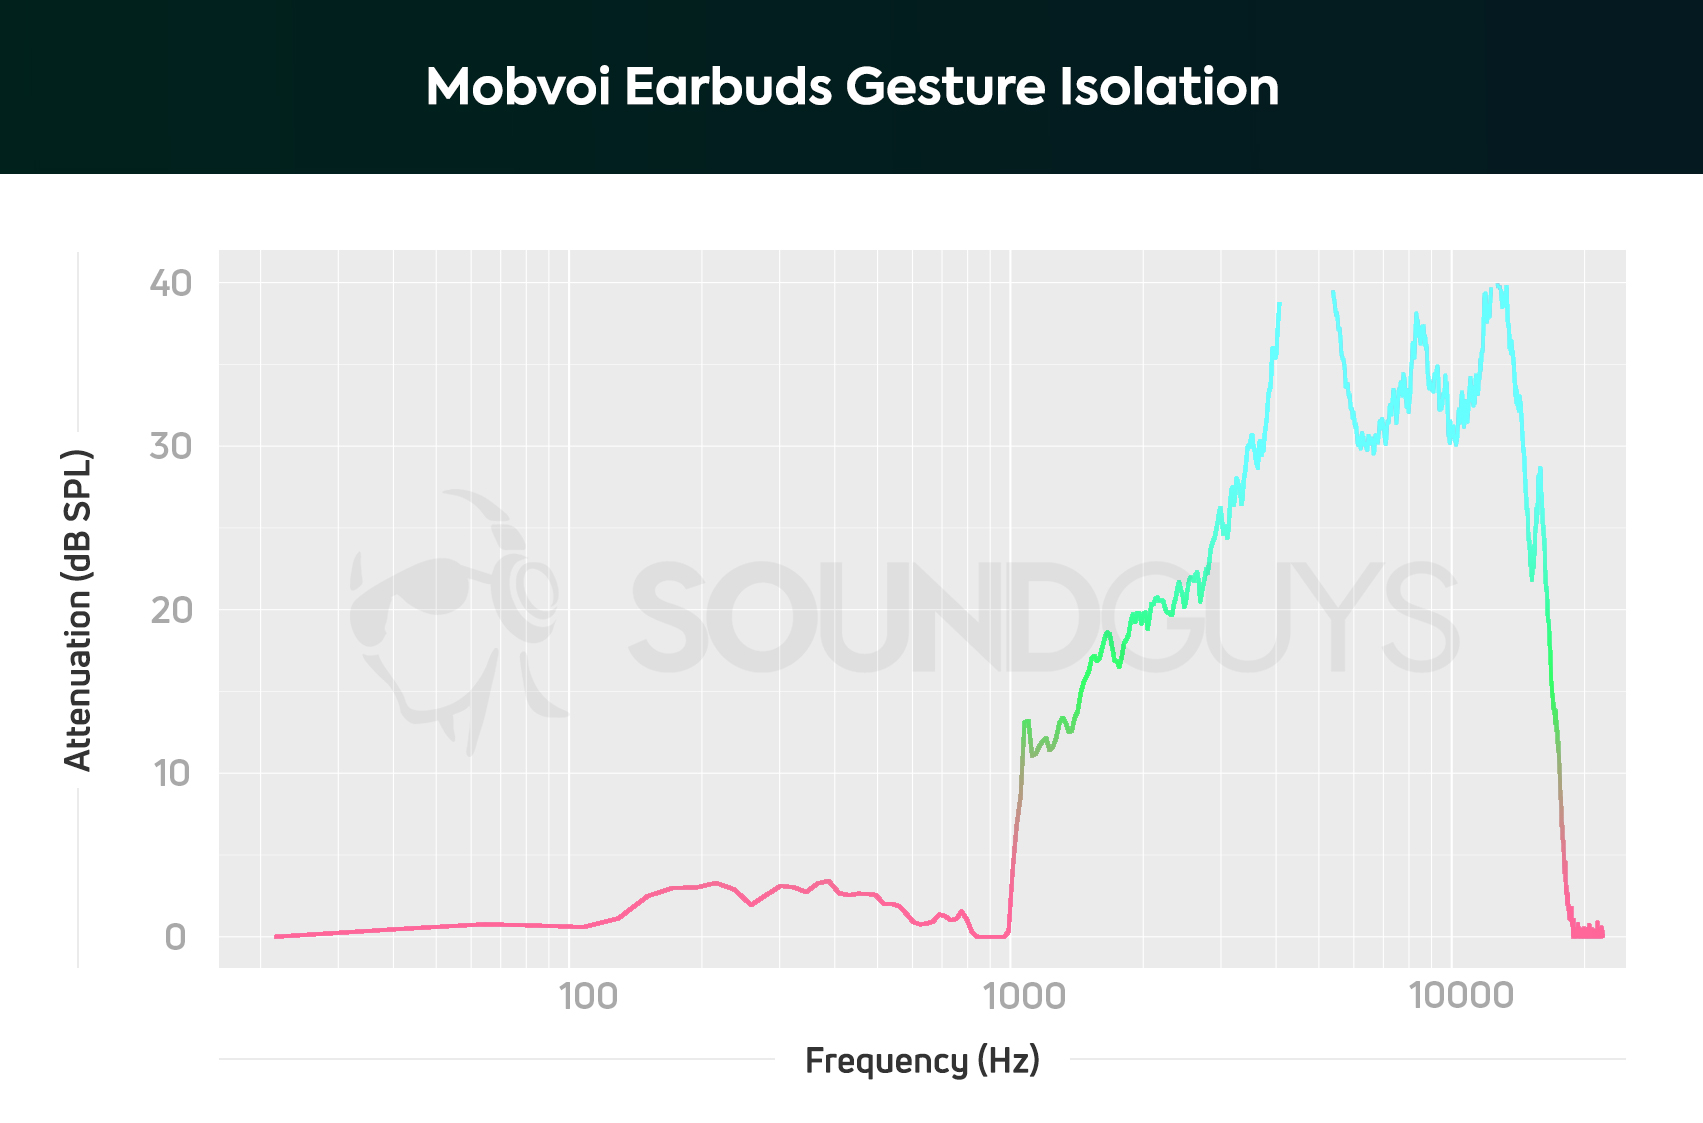 A passive isolation chart depicts the Mobvoi Earbuds Gesture isolation performance, which is average.